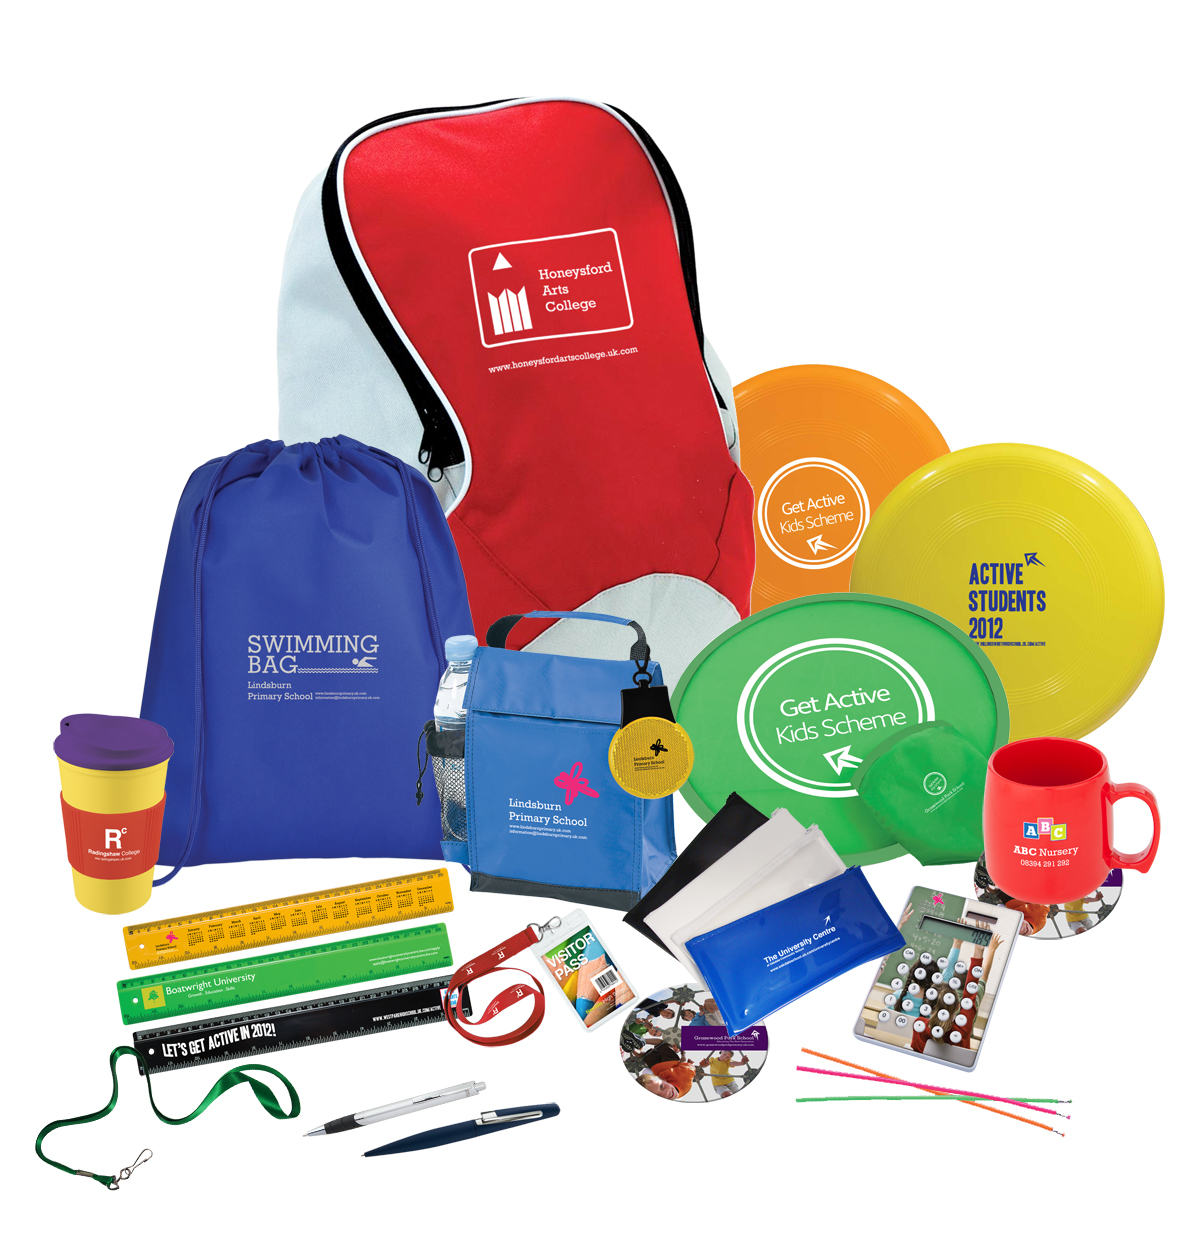 Custom Promotional Products Solutions: Boost Your Brand's Presence and ...